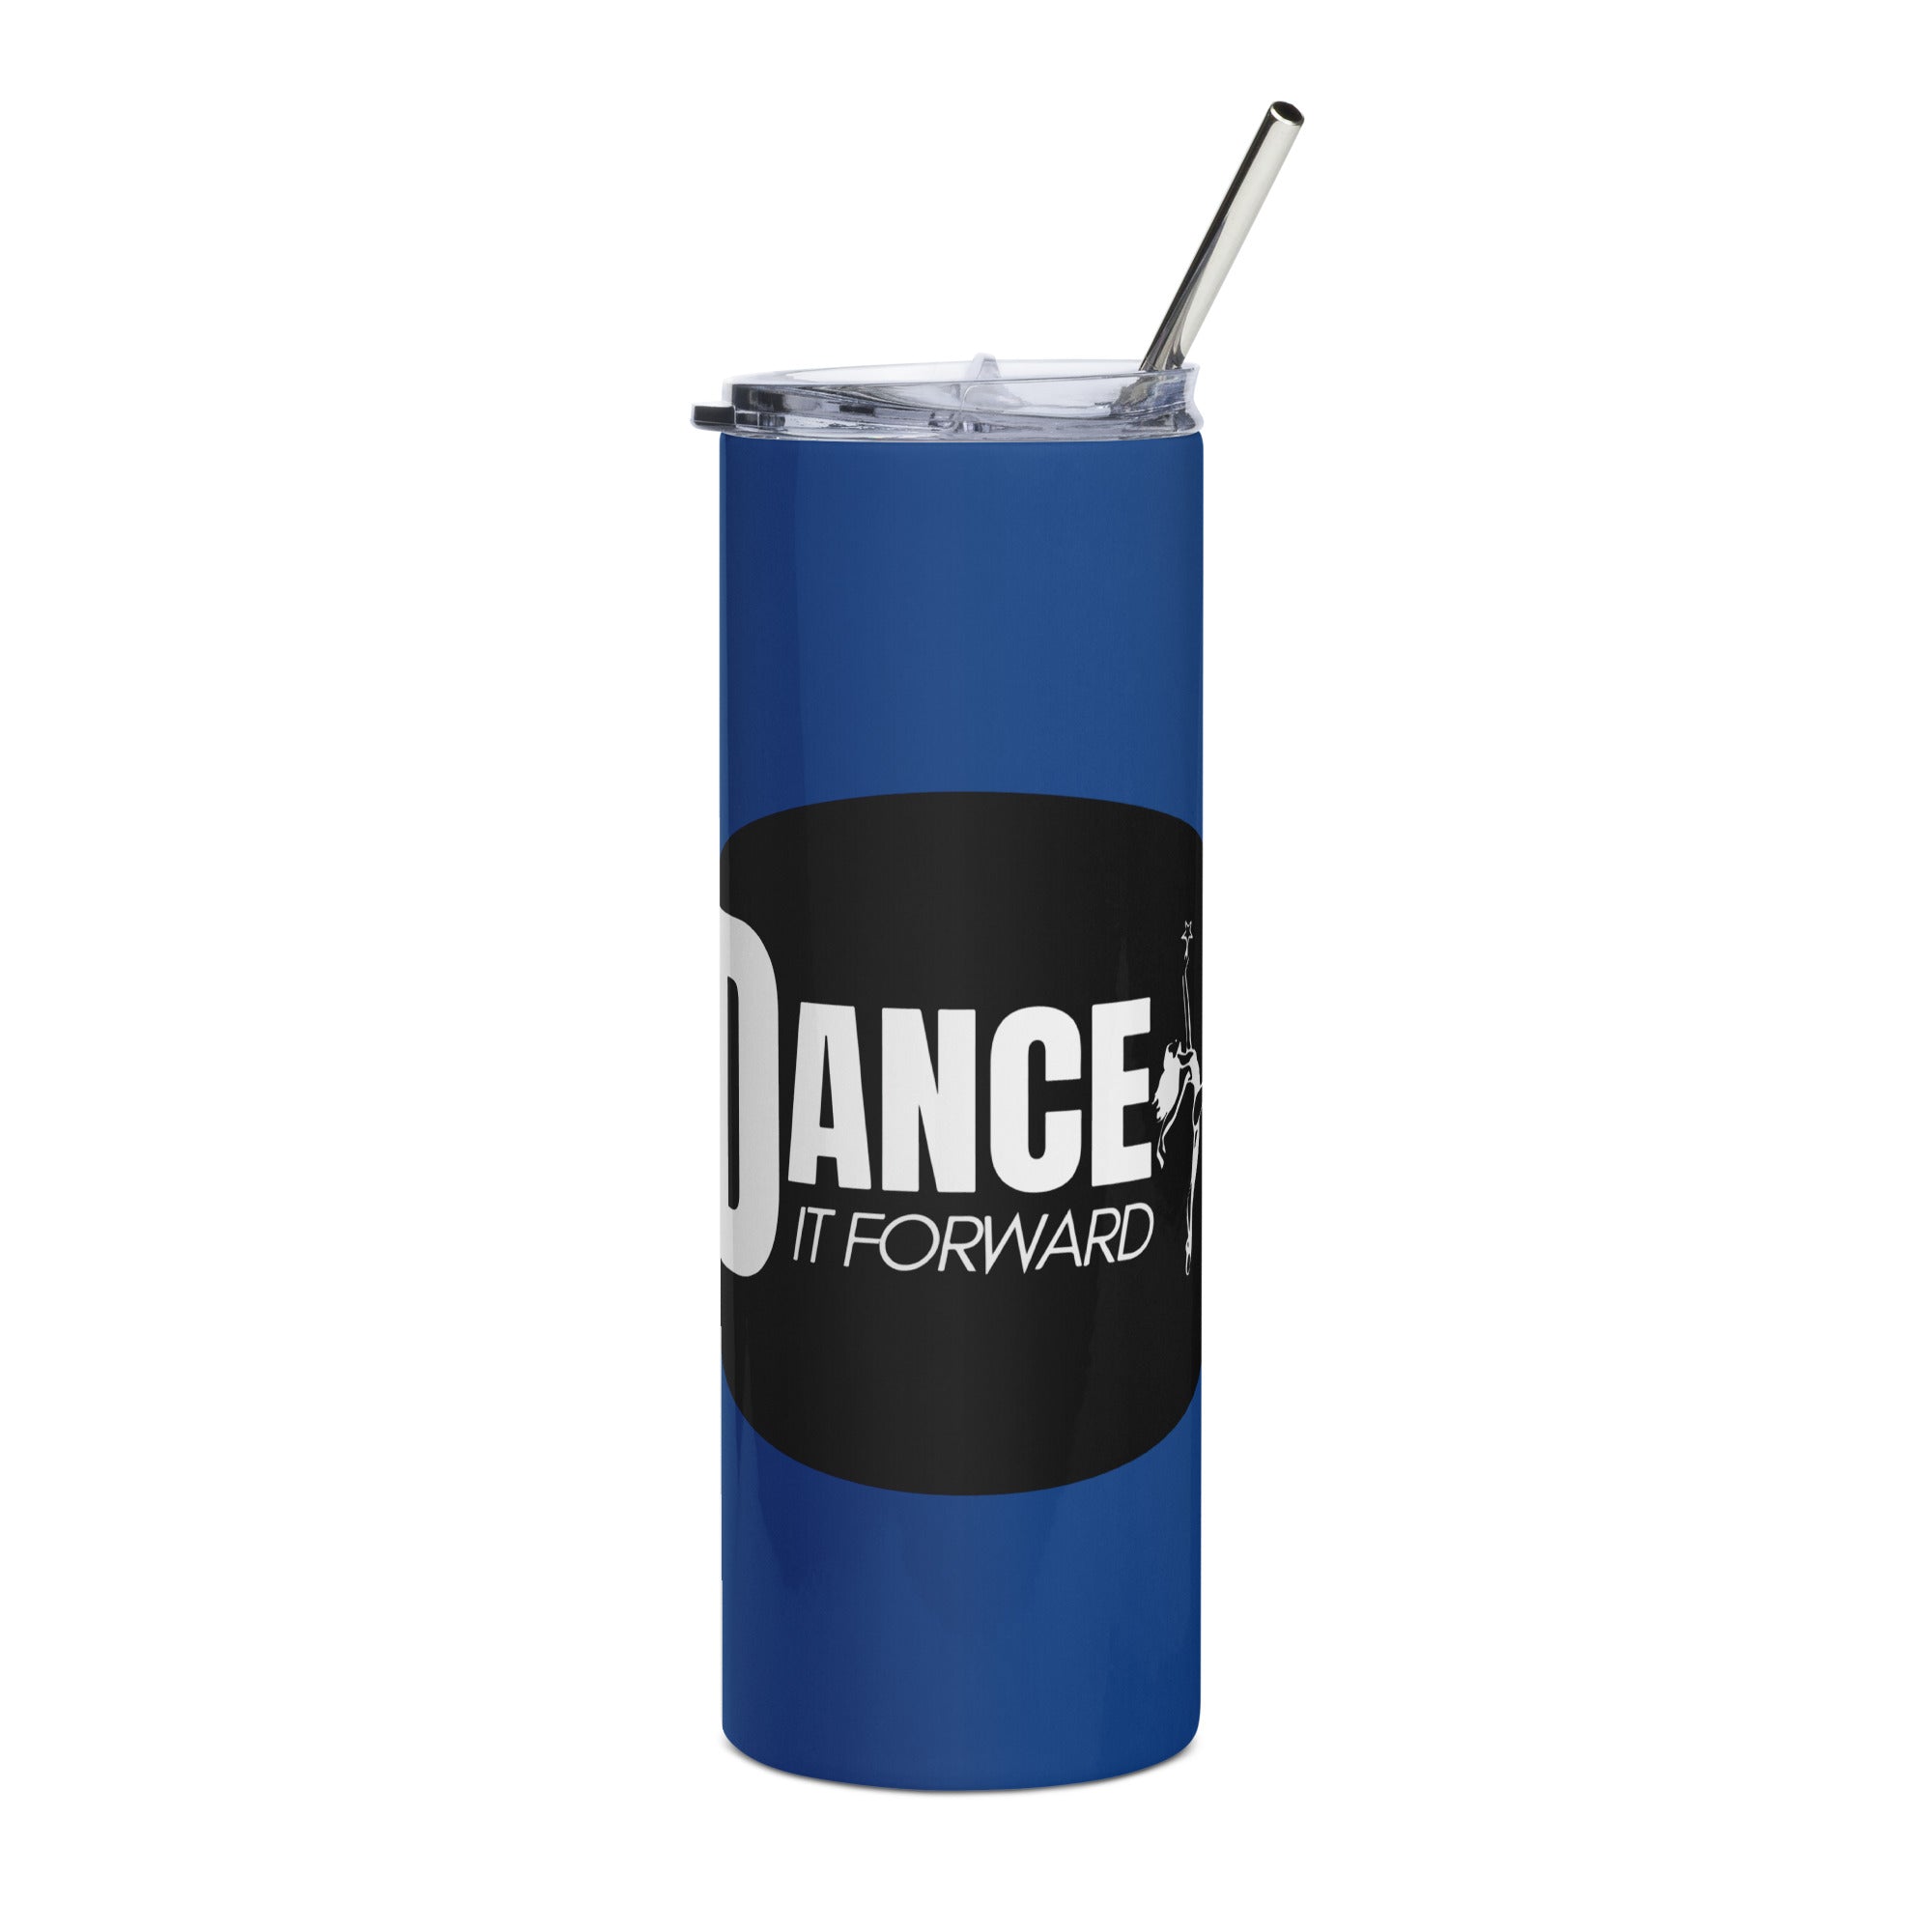 DIF/GYD Stainless steel tumbler